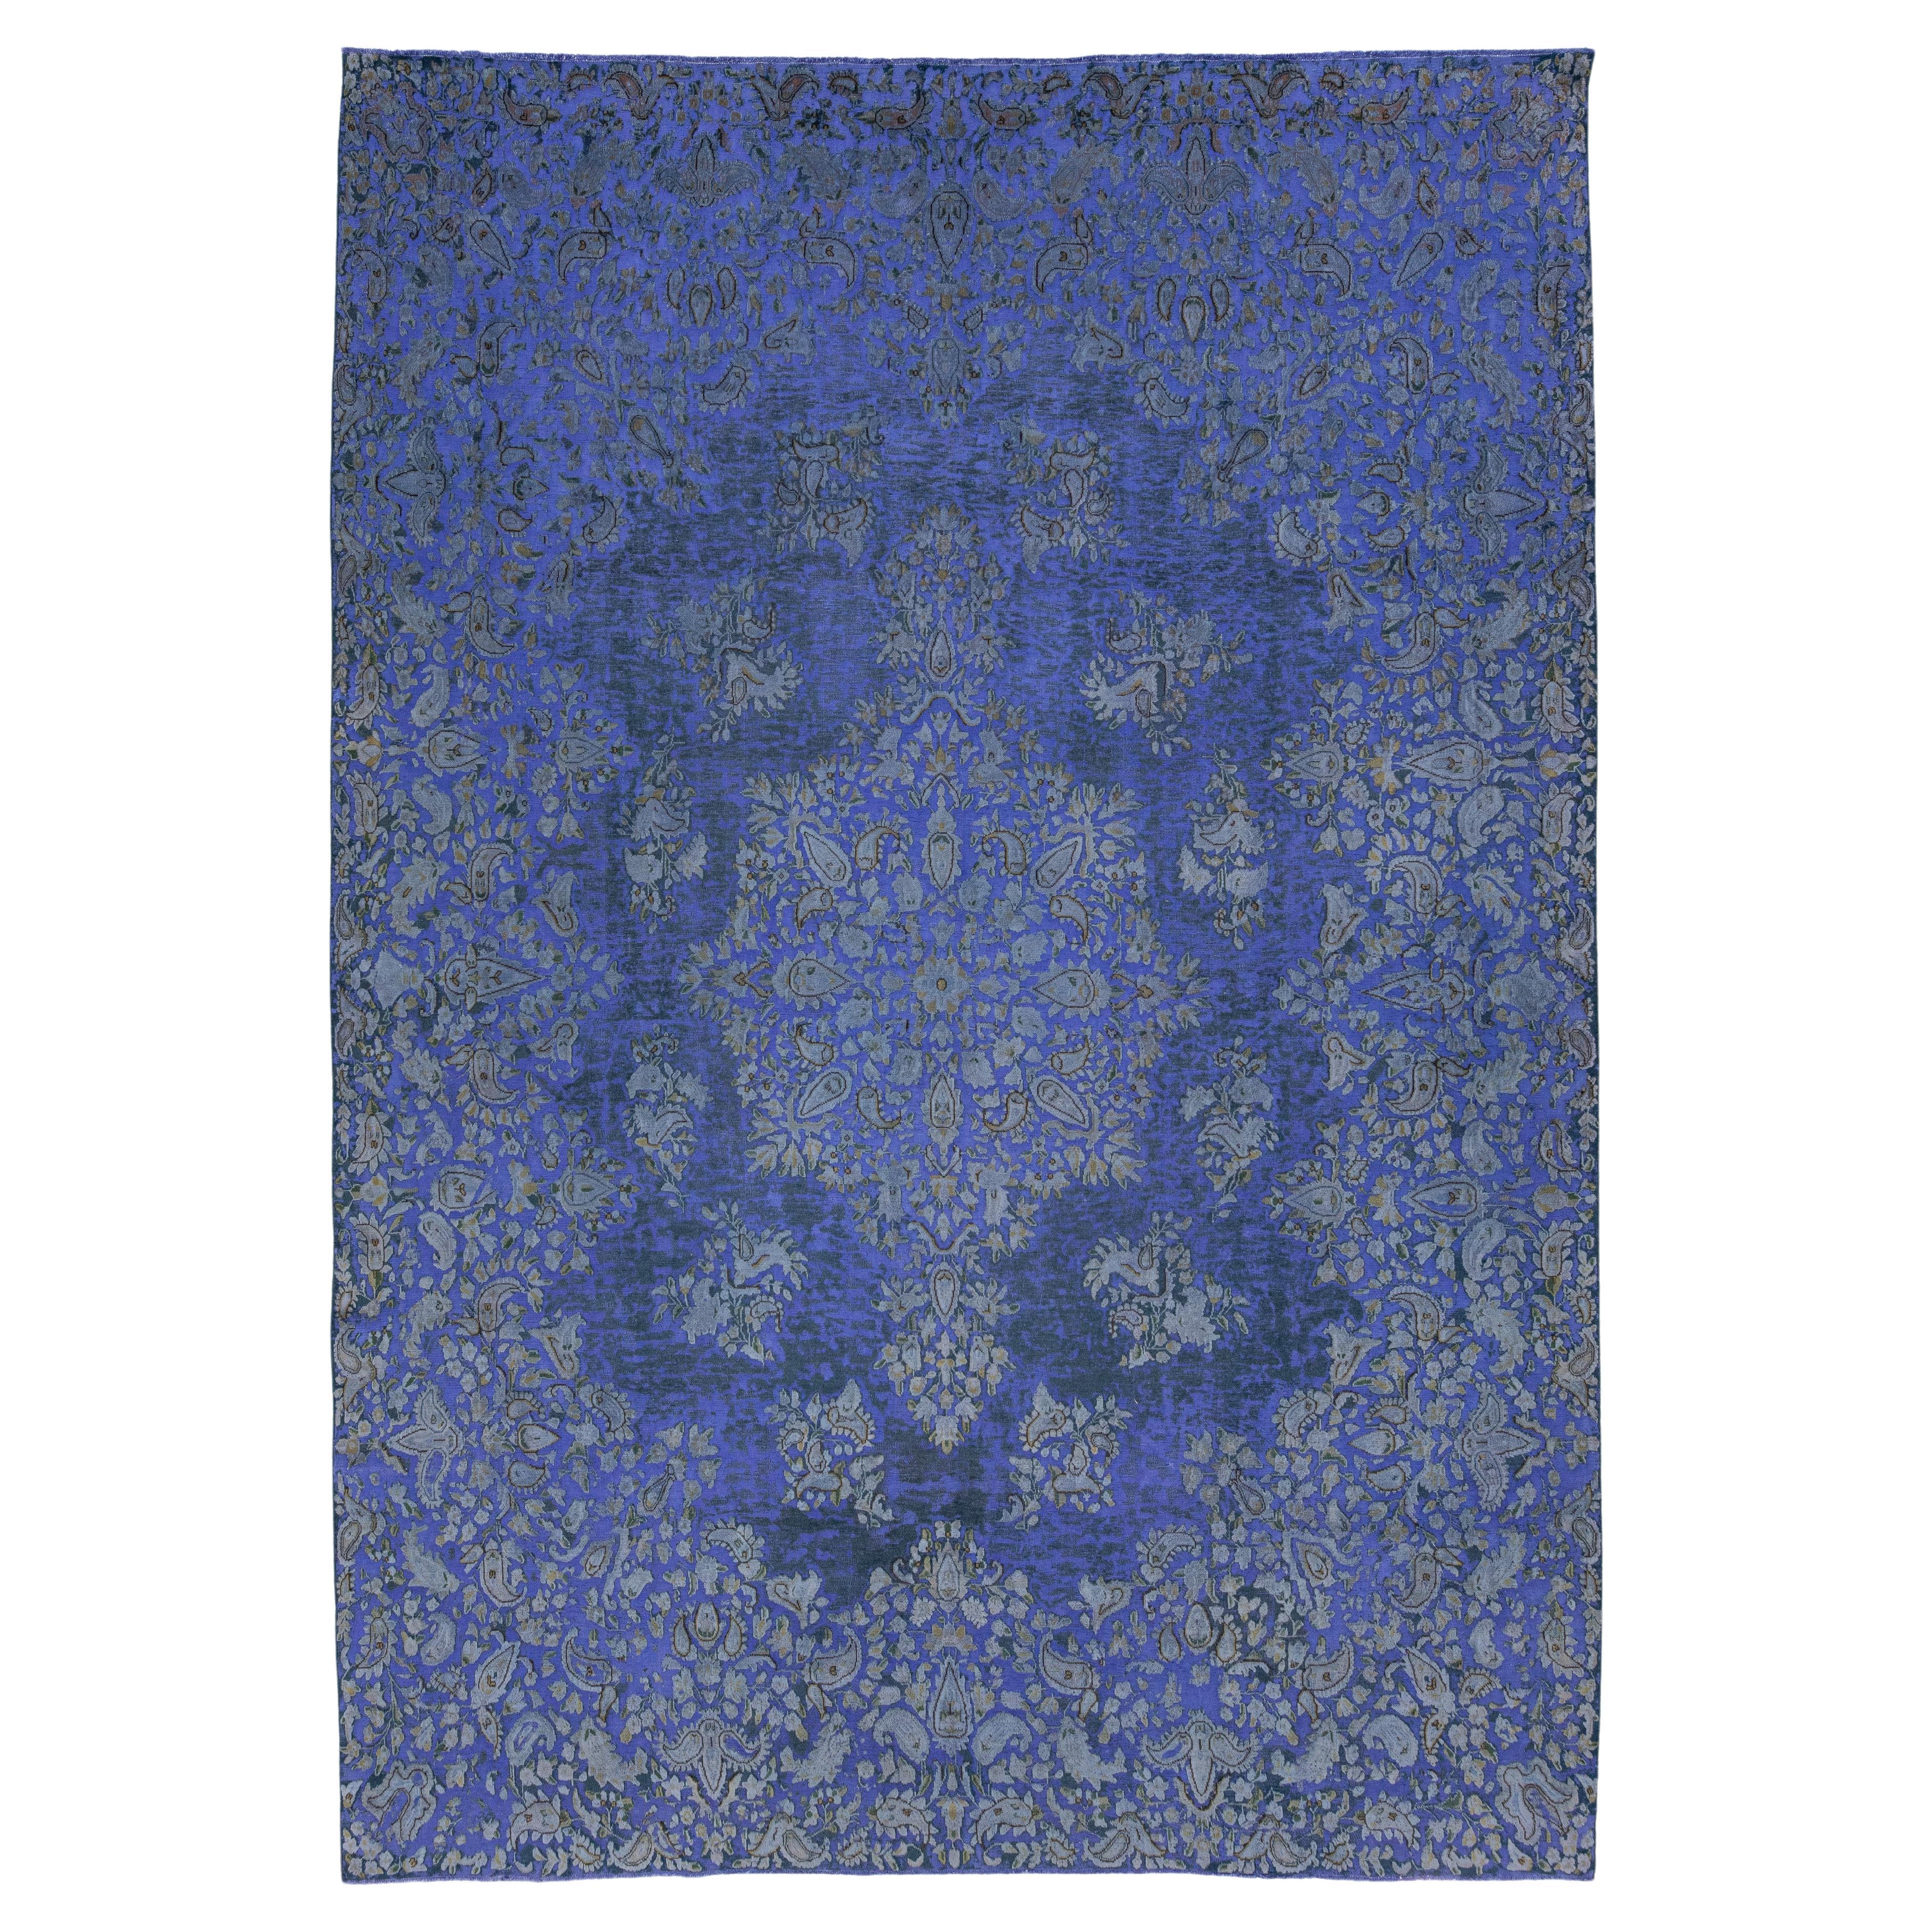 Antique Persian Purple Overdyed Wool Rug With Allover Rosette Pattern